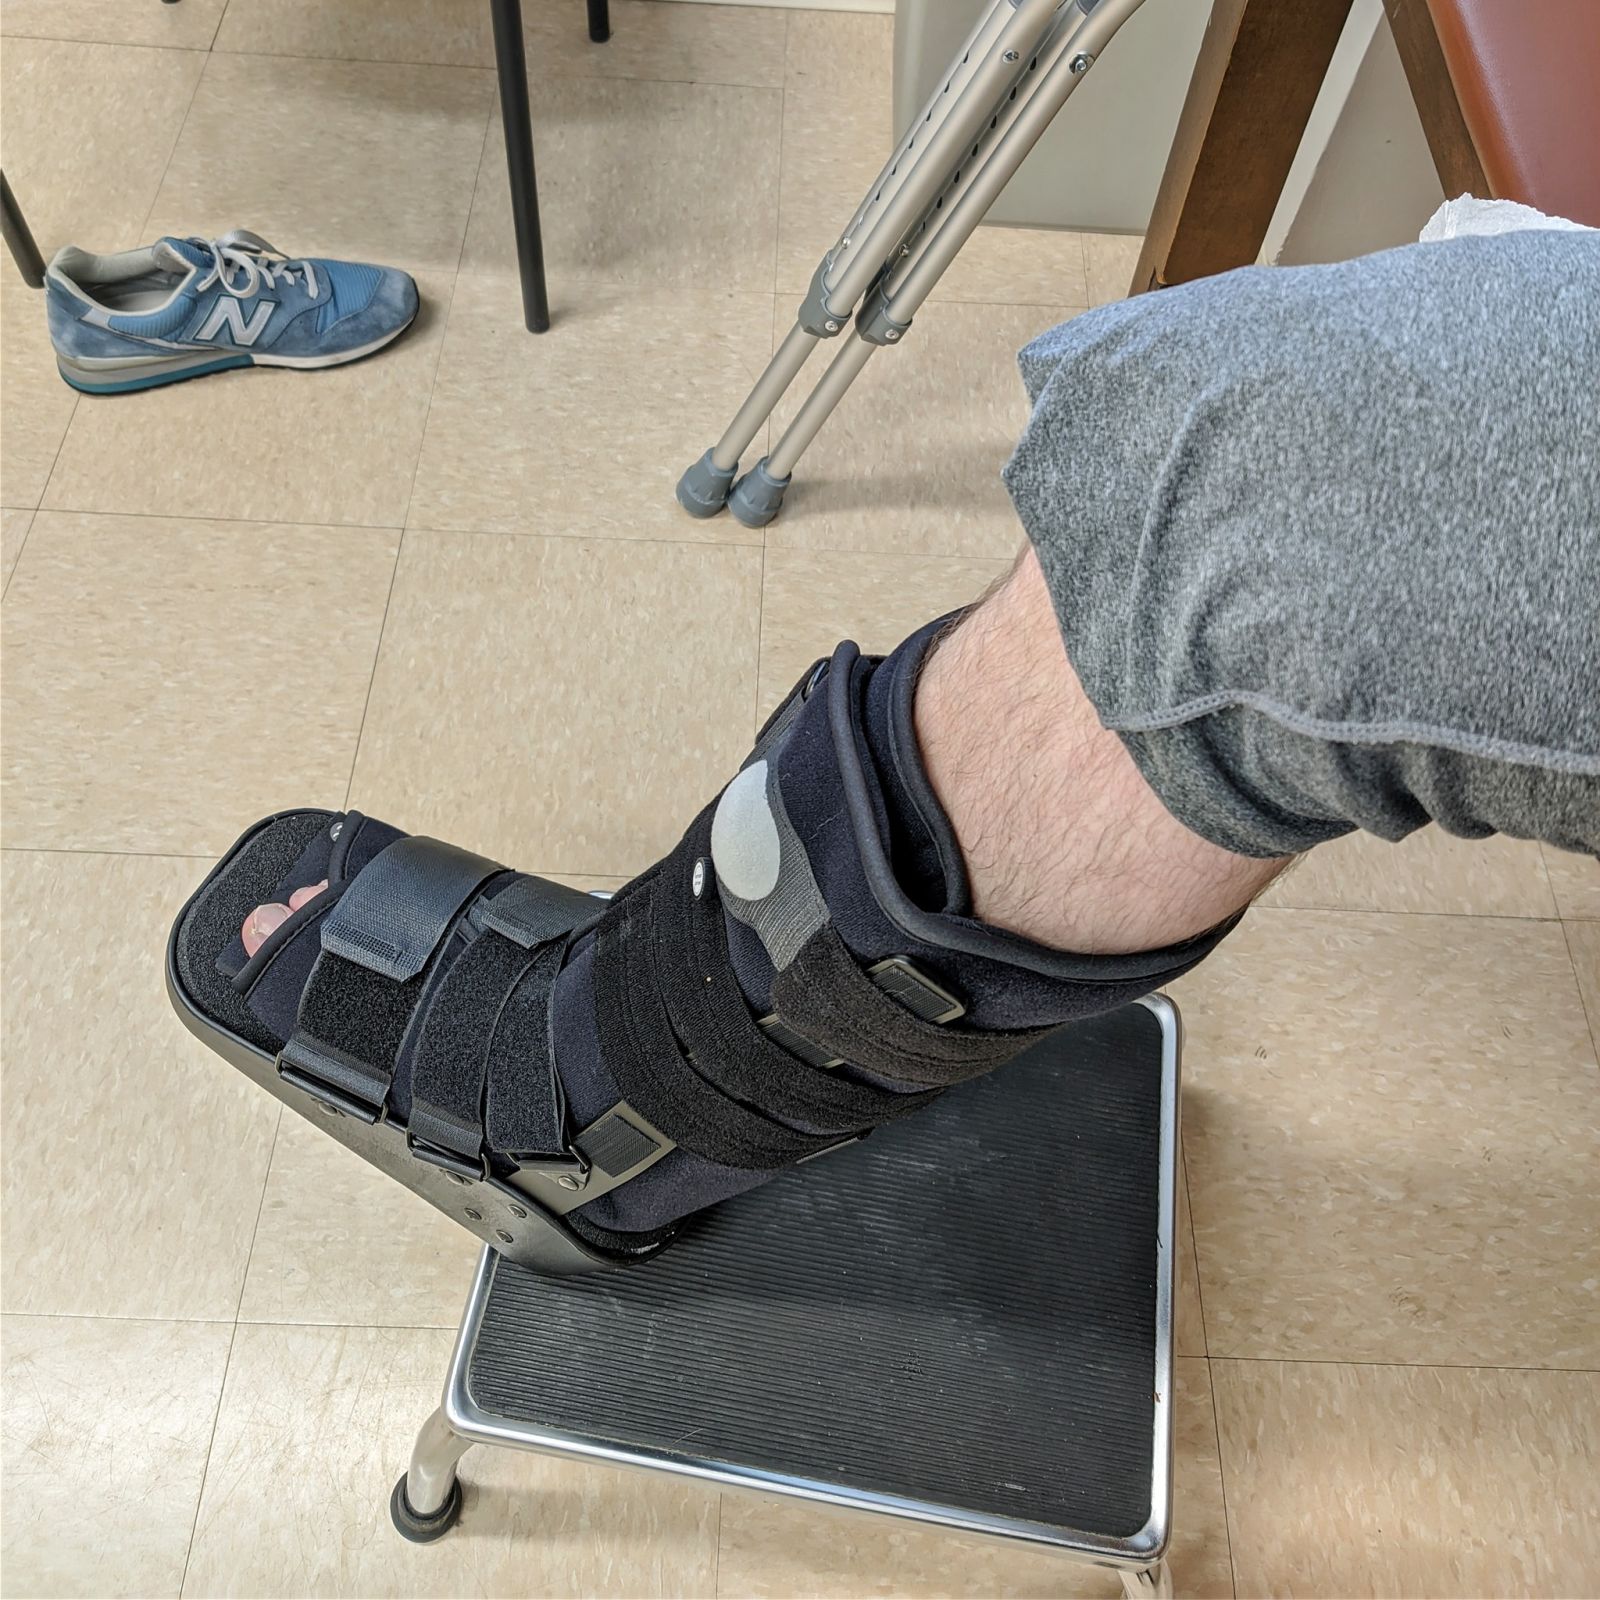 Illustration for article titled Upgraded my splint to this kickass boot